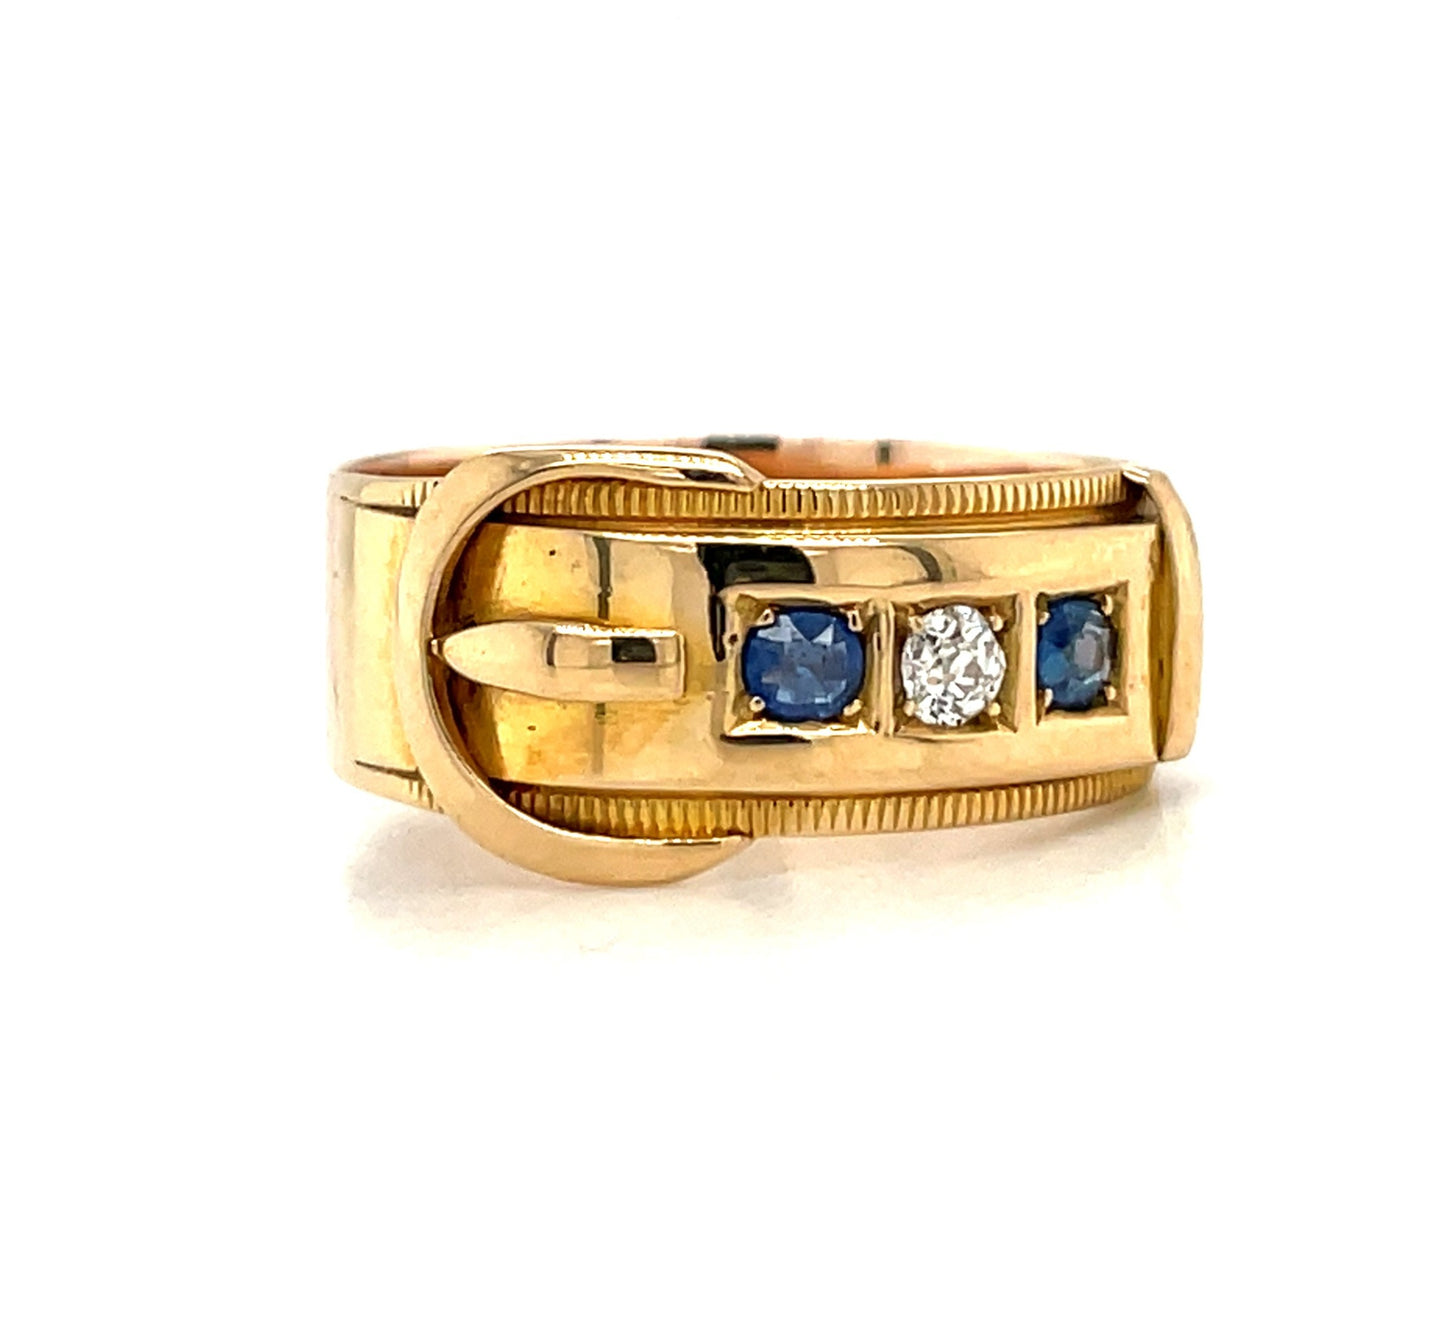 Vintage 14k Yellow Gold Diamond and Sapphire Buckle Ring Size 7